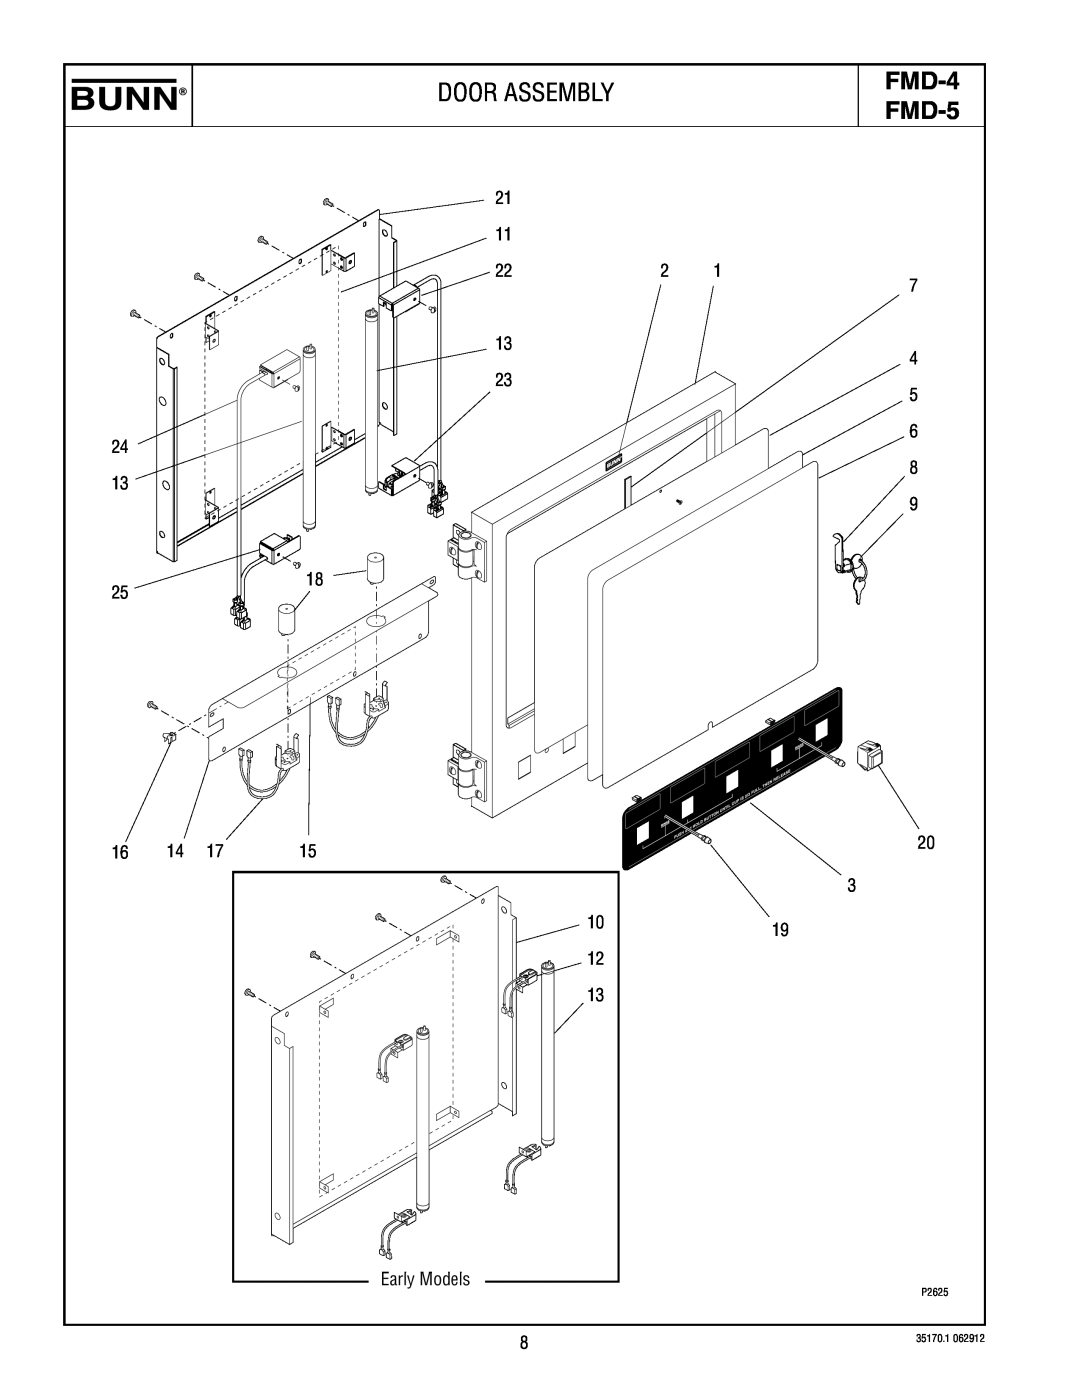 Bunn FMD-5 specifications Door Assembly, FMD-4, P2625, 35170.1 